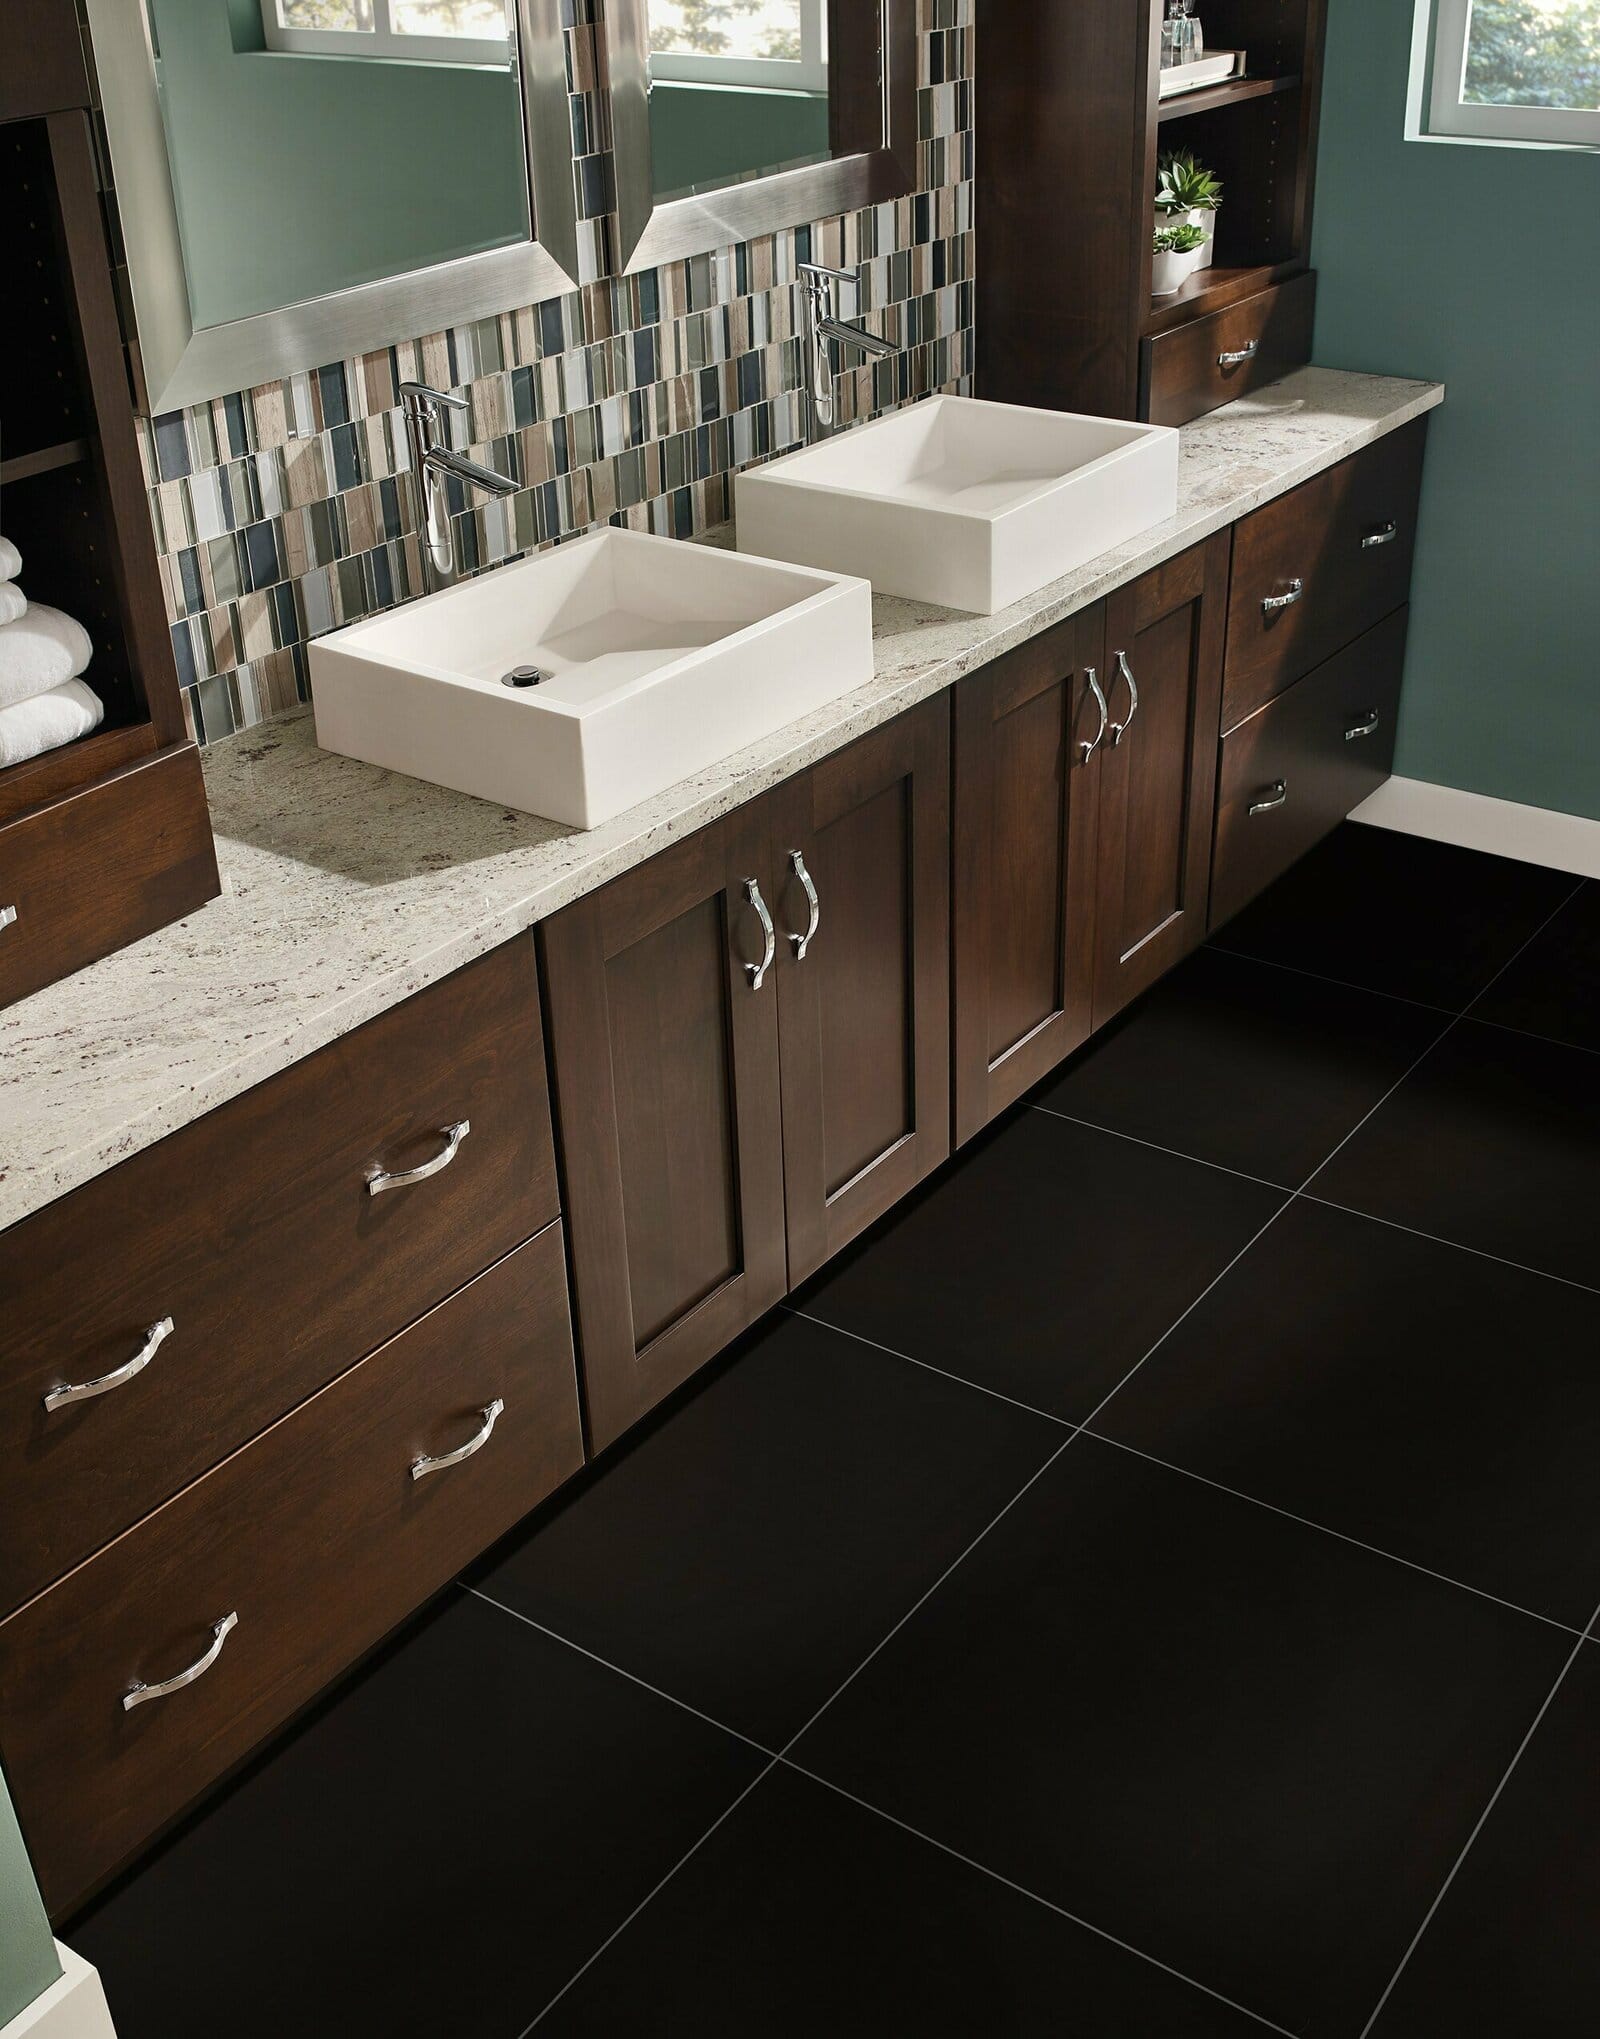 Keep a Clean Look with Large Black Porcelain Tile